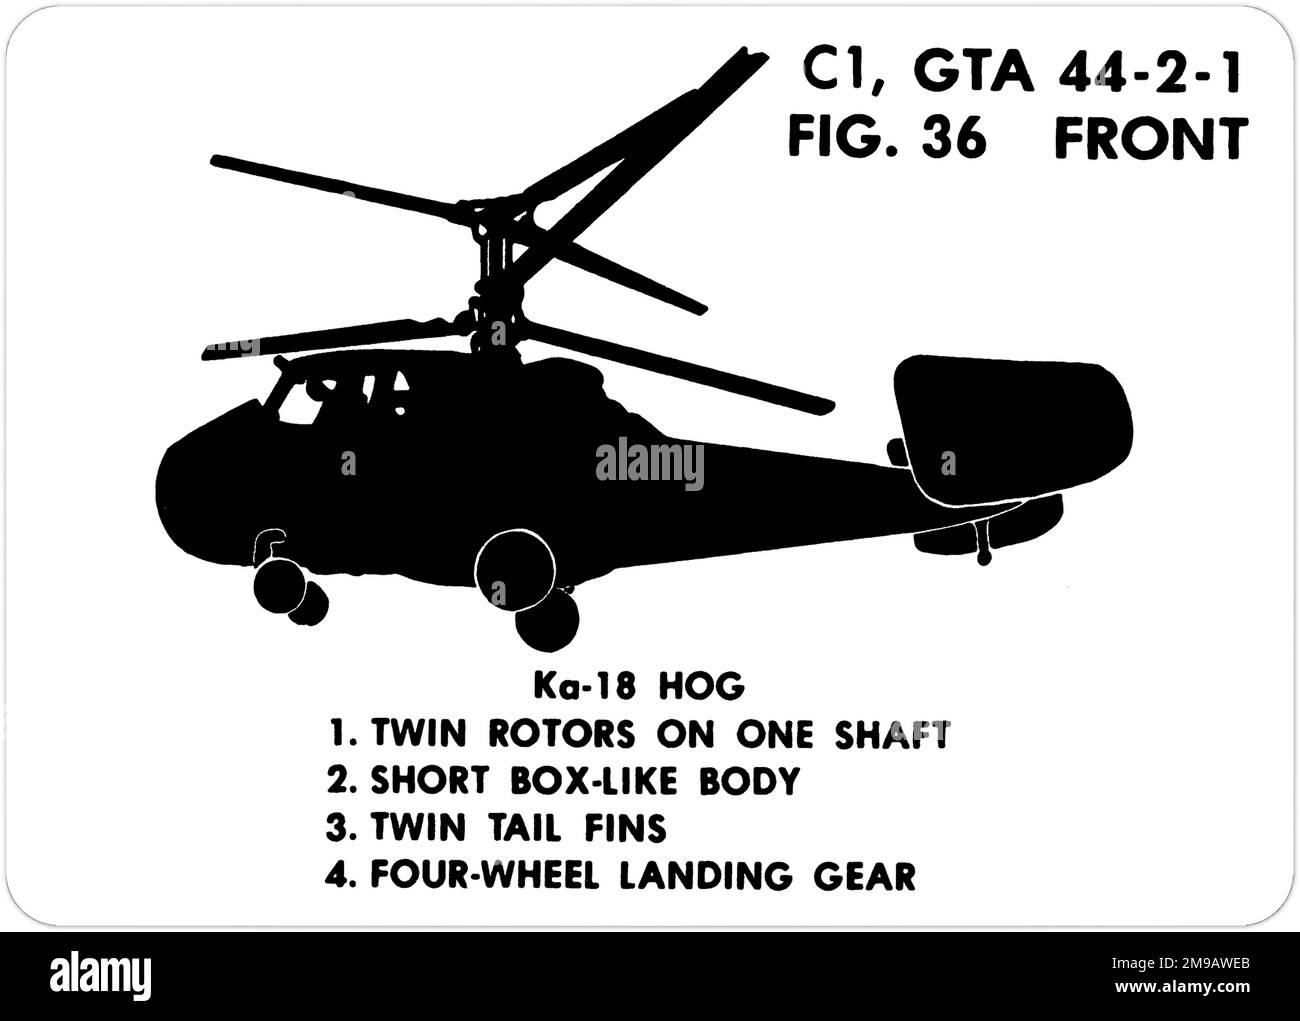 Kamov Ka-18 (NATO codename: Hog). This is one of the series of Graphics Training Aids (GTA) used by the United States Army to train their personnel to recognize friendly and hostile aircraft. This particular set, GTA 44-2-1, was issued in July1977. The set features aircraft from: Canada, Italy, United Kingdom, United States, and the USSR. Stock Photo